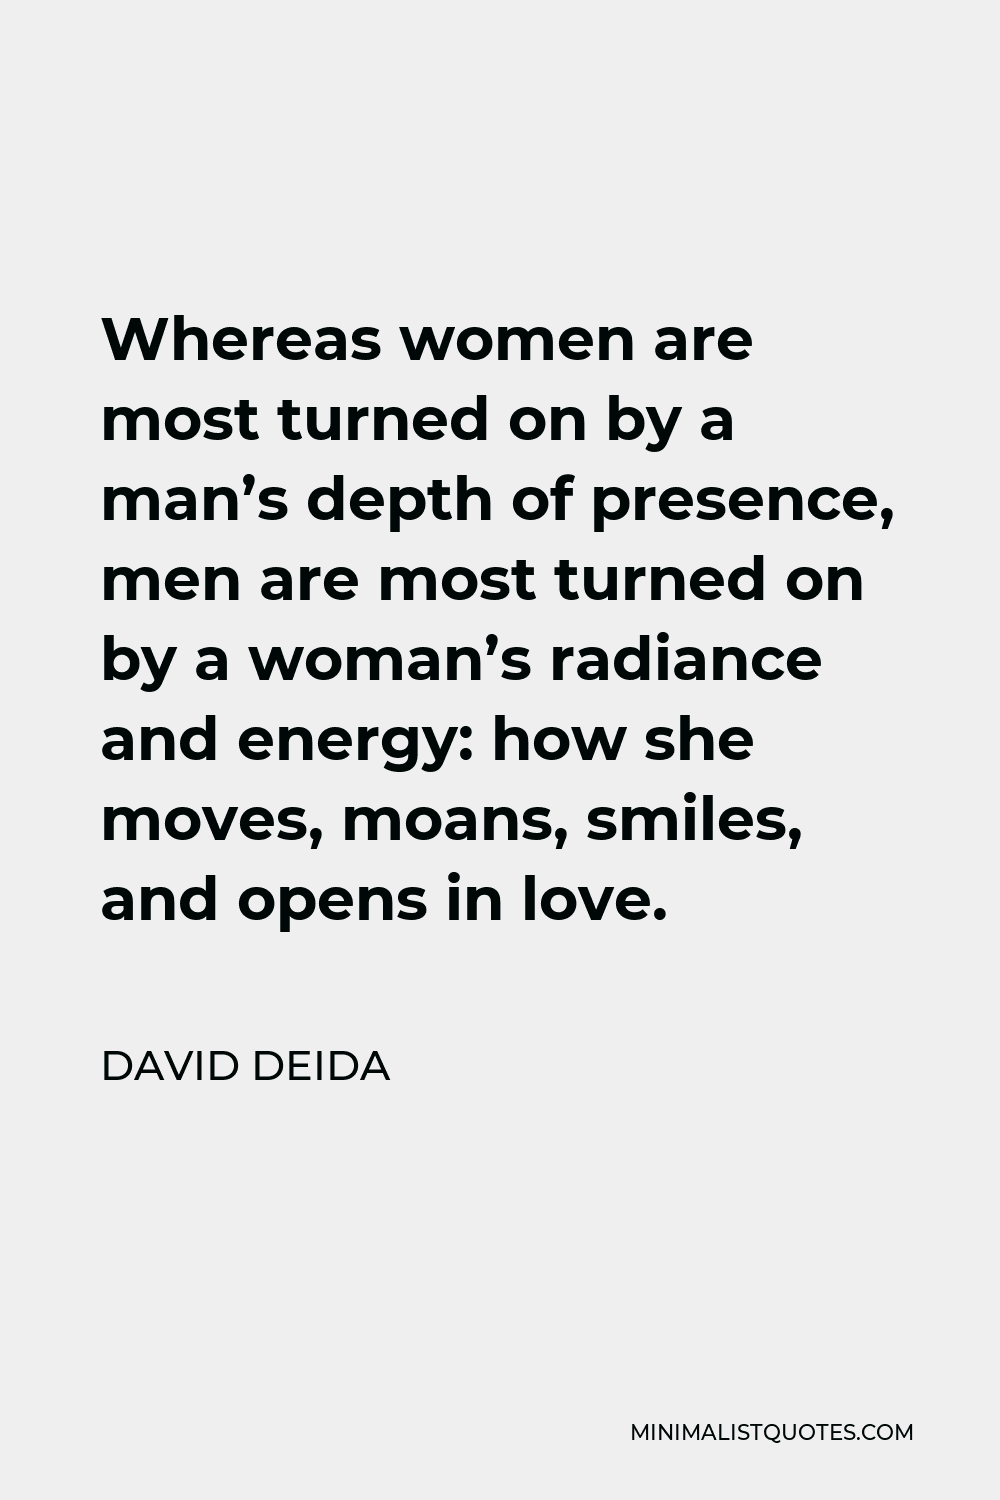 David Deida Quote - Whereas women are most turned on by a man’s depth of presence, men are most turned on by a woman’s radiance and energy: how she moves, moans, smiles, and opens in love.